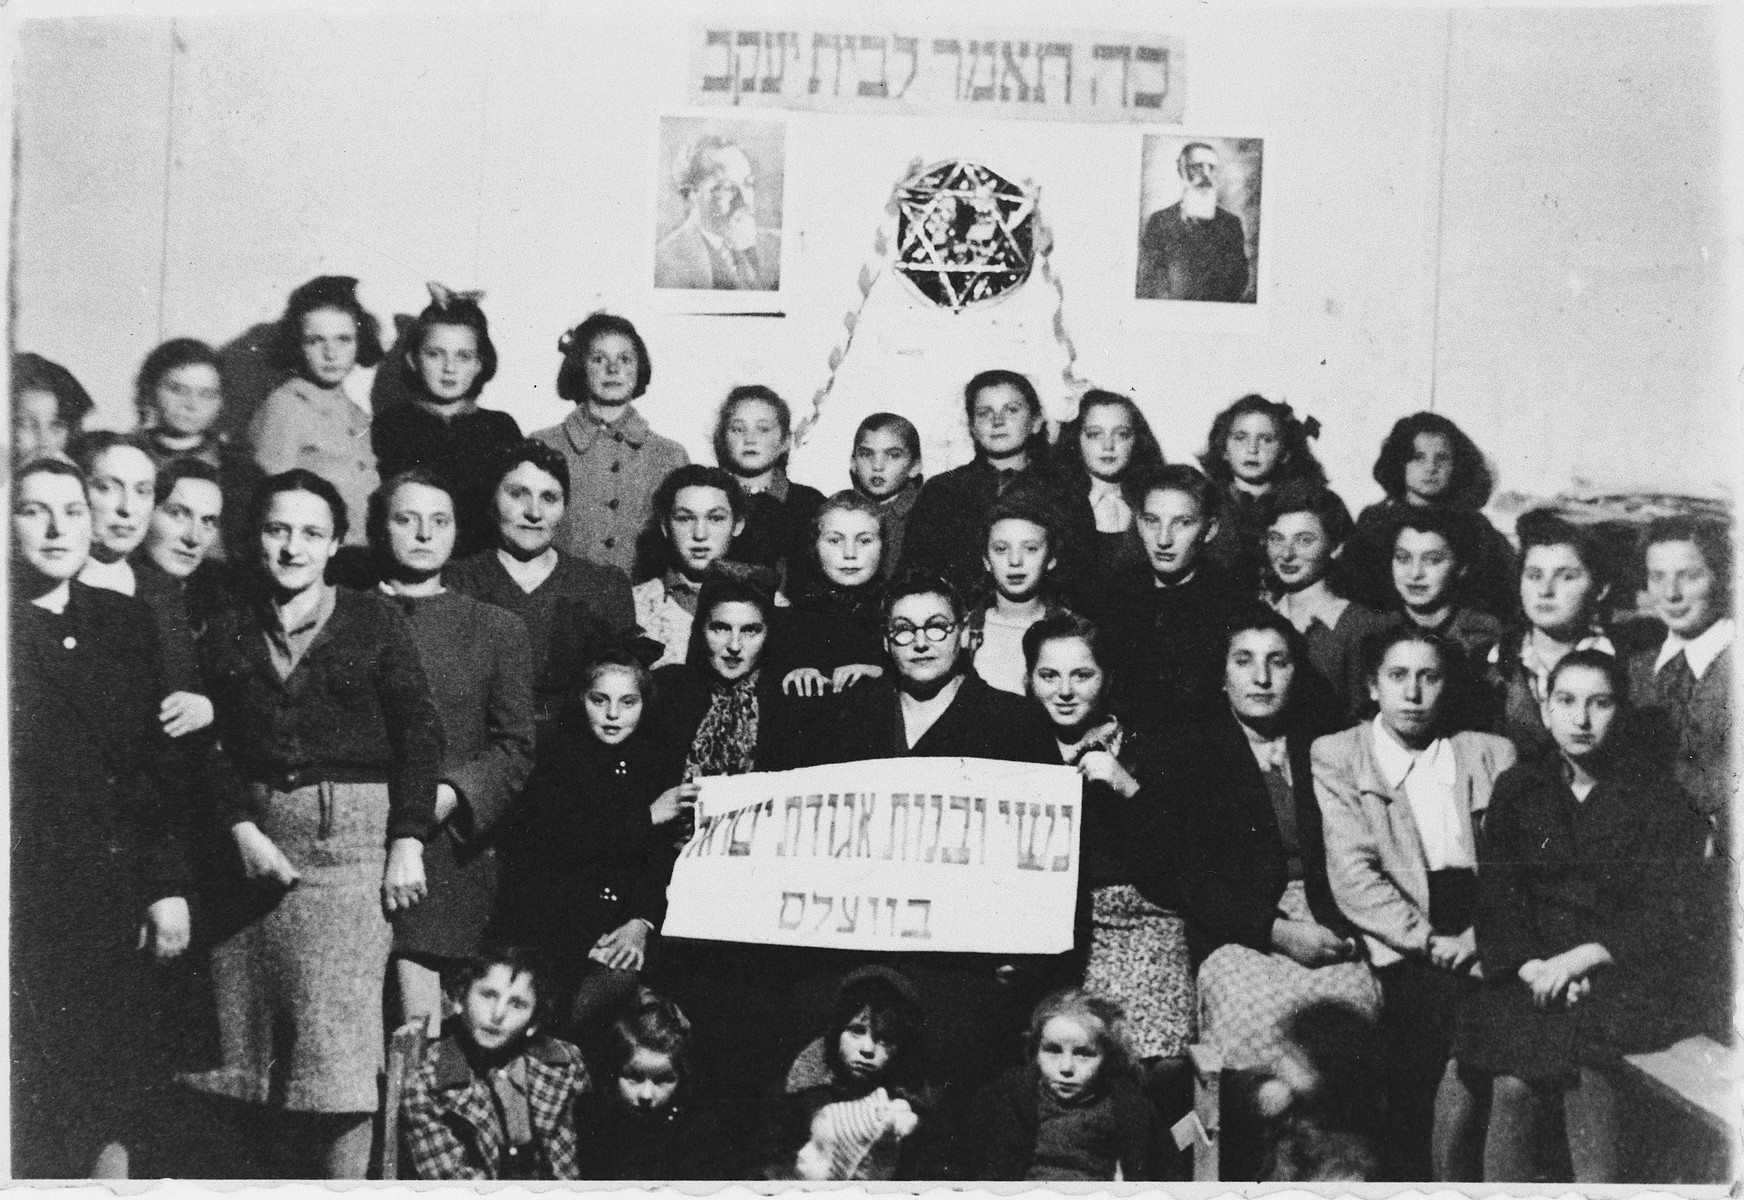 Group portrait of the students and teachers from the Beit Yaakov school in the Wels displaced persons' camp.

Those pictured include Charlotta Wagner.